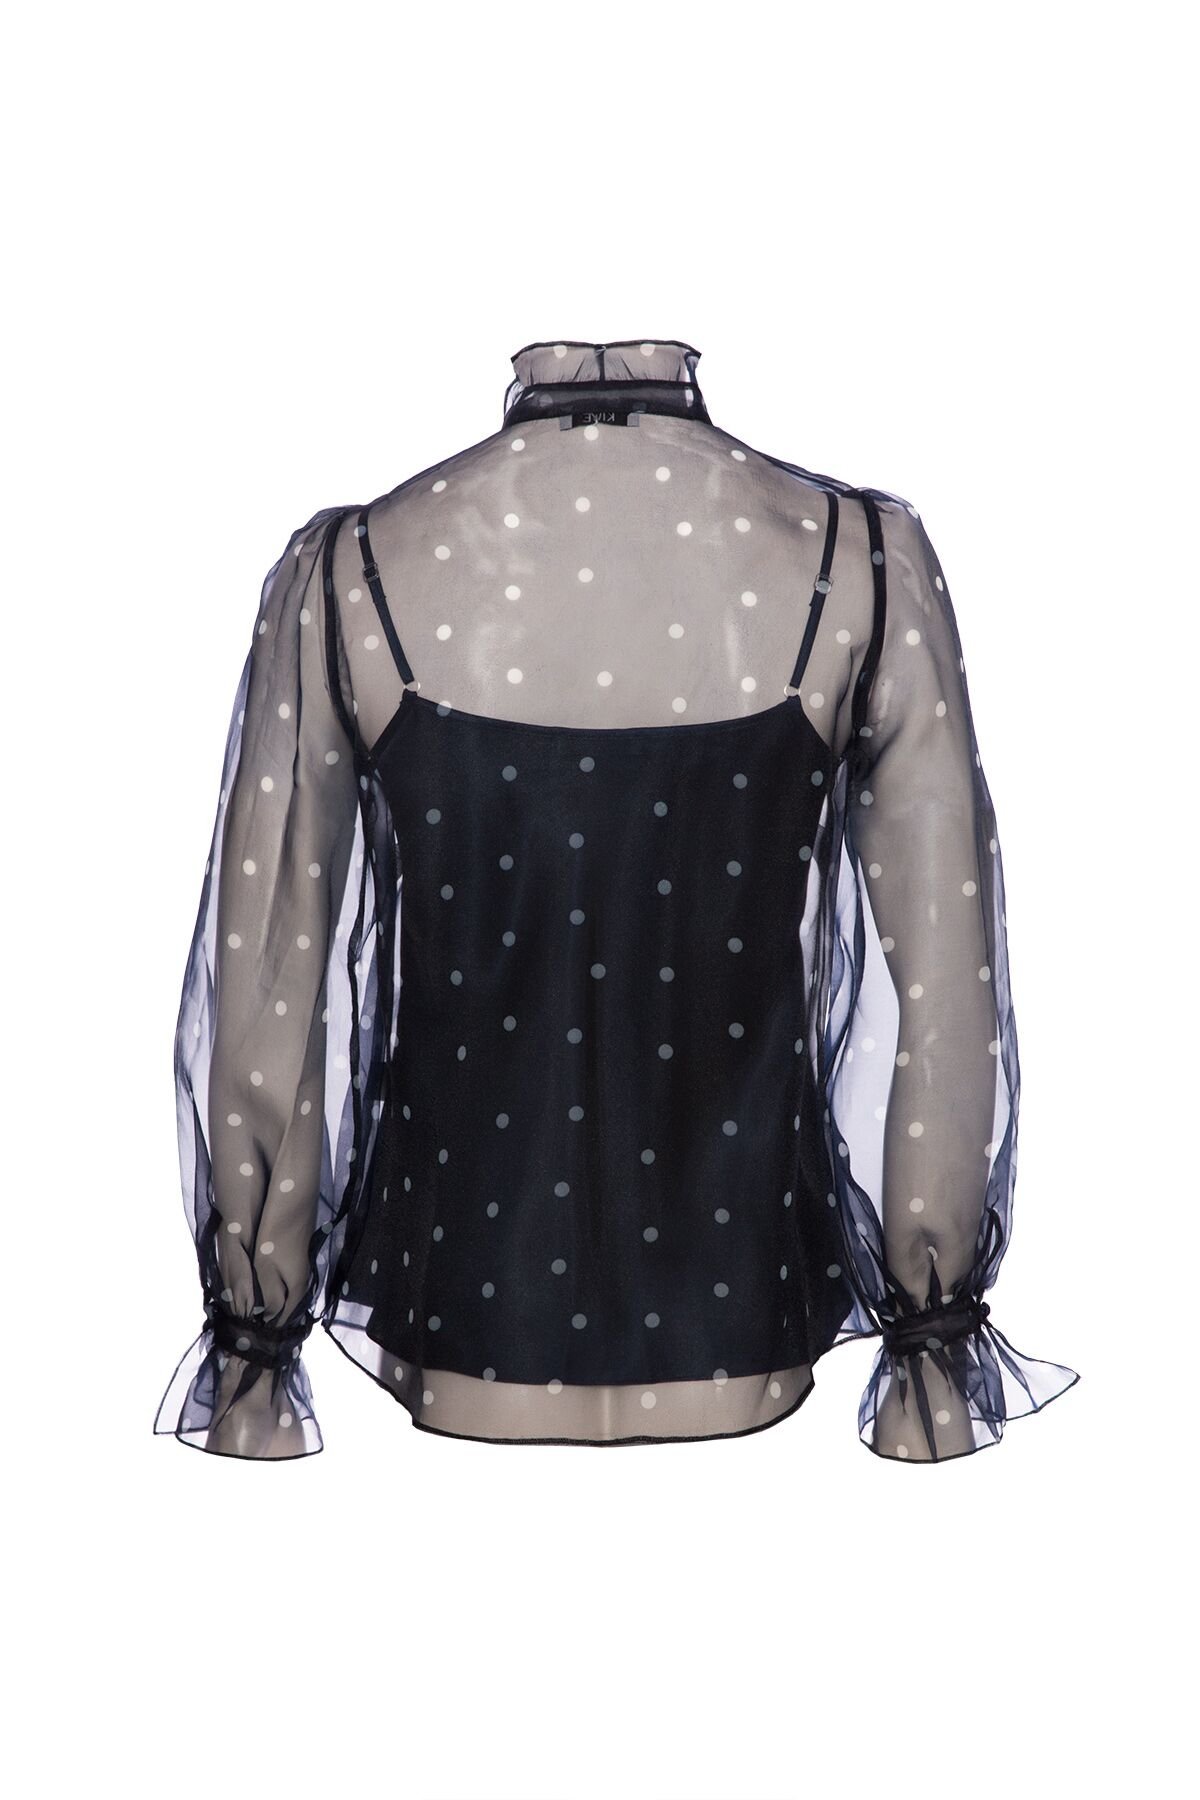 Polka Dot Navy Blue Shirt With Ruffle And Flounce Detail On The Collar